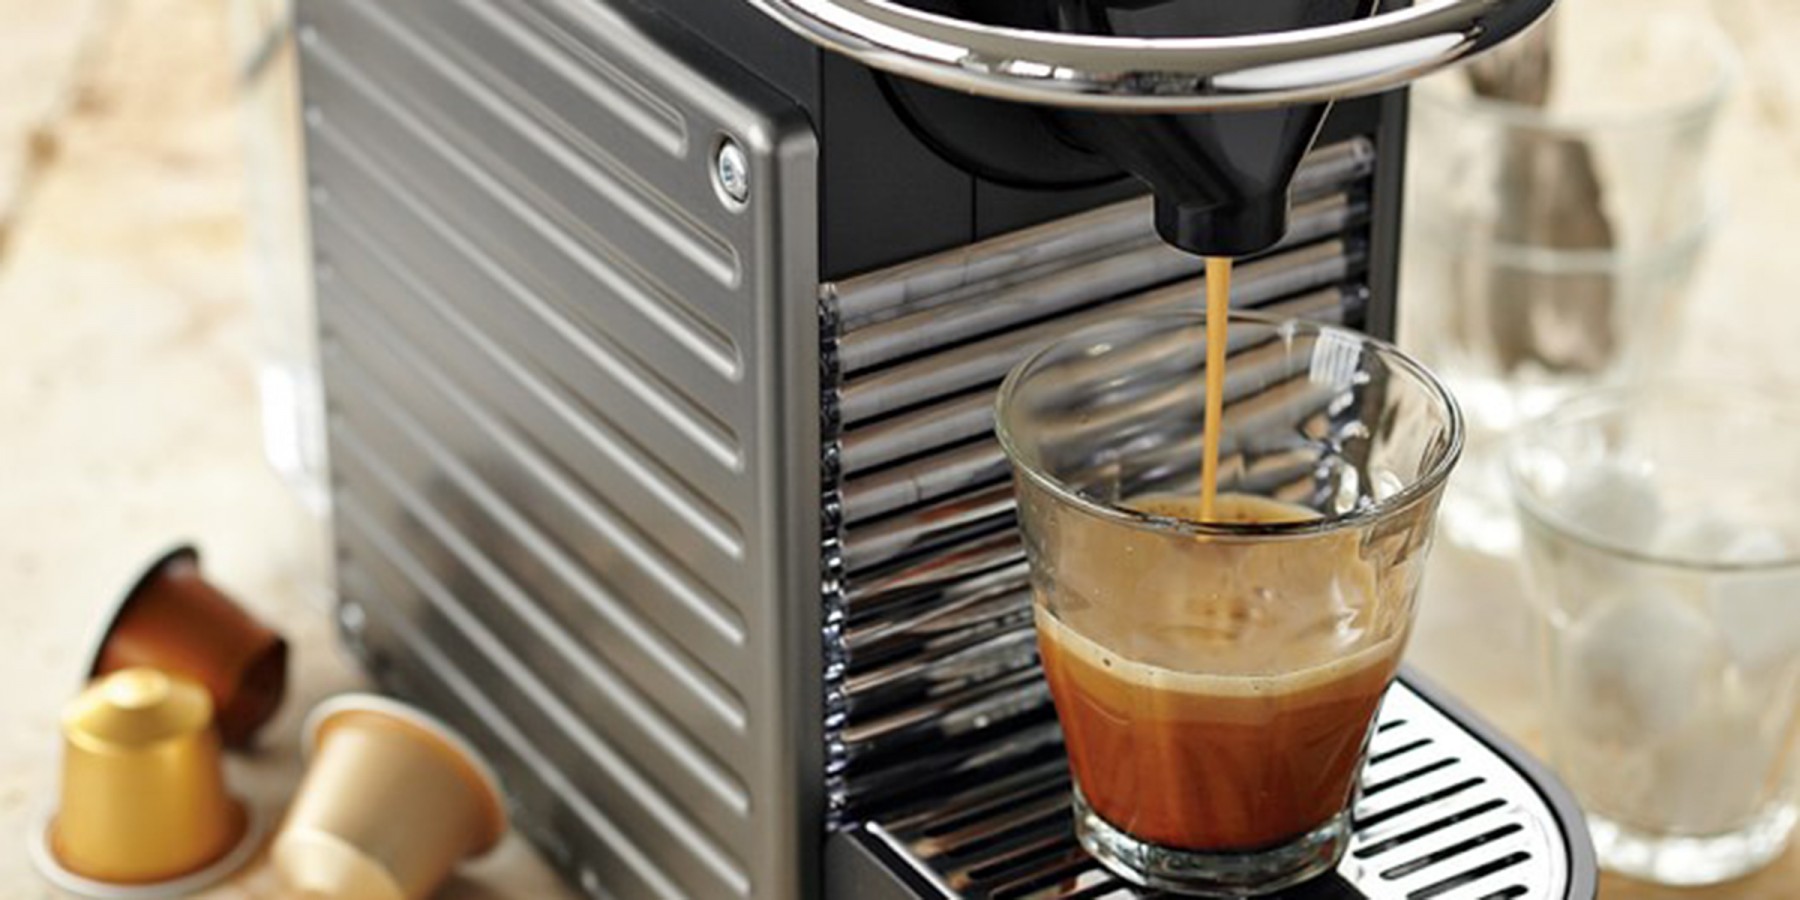 5 Easy Tips For Making The Best Nespresso Coffee